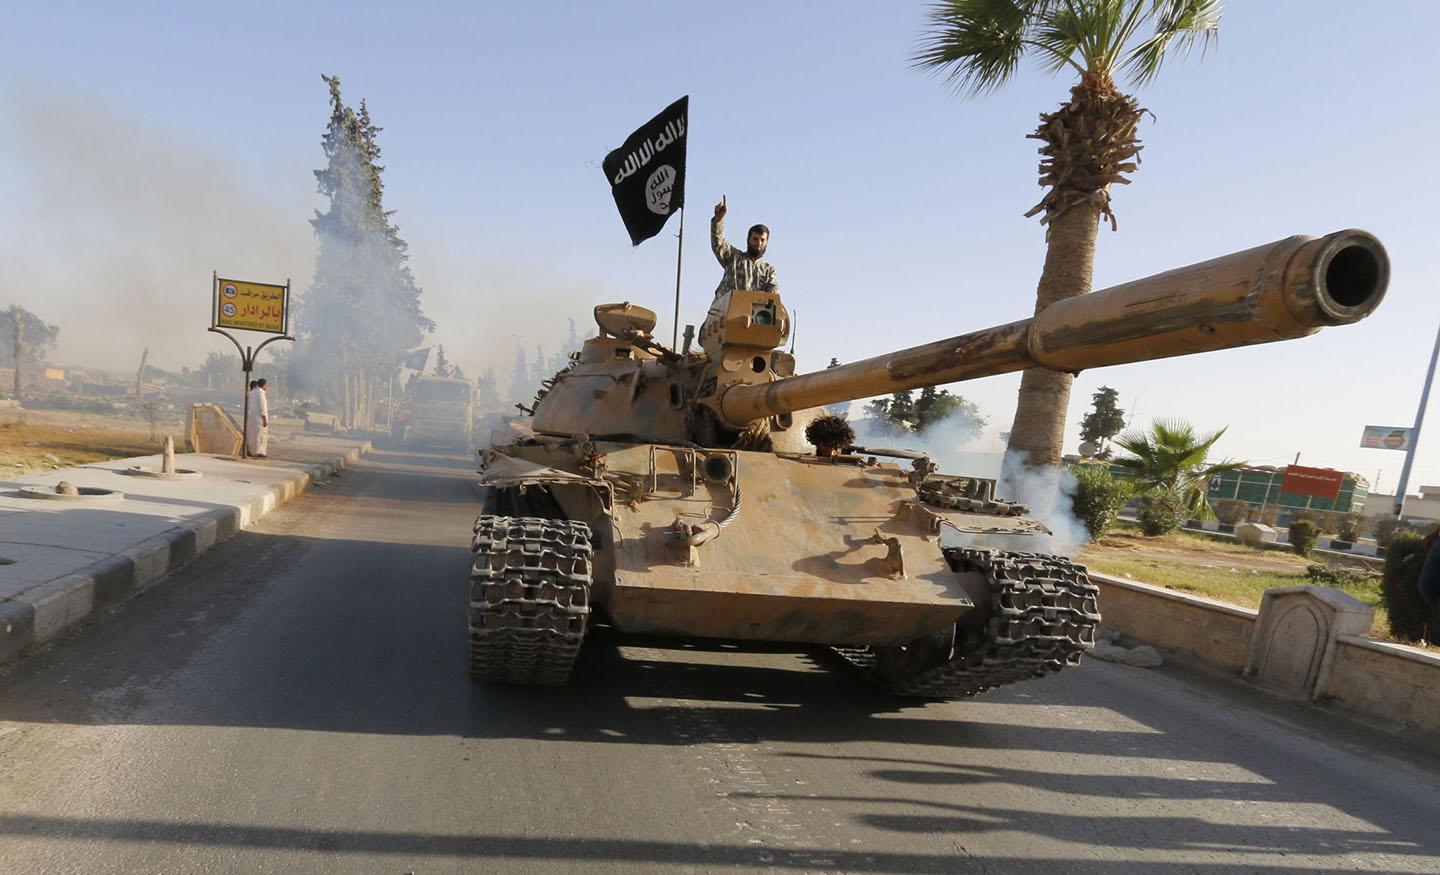 ISIS fighters on a tank take part in a military parade along the streets of northern Raqqa province June 30, 2014. 